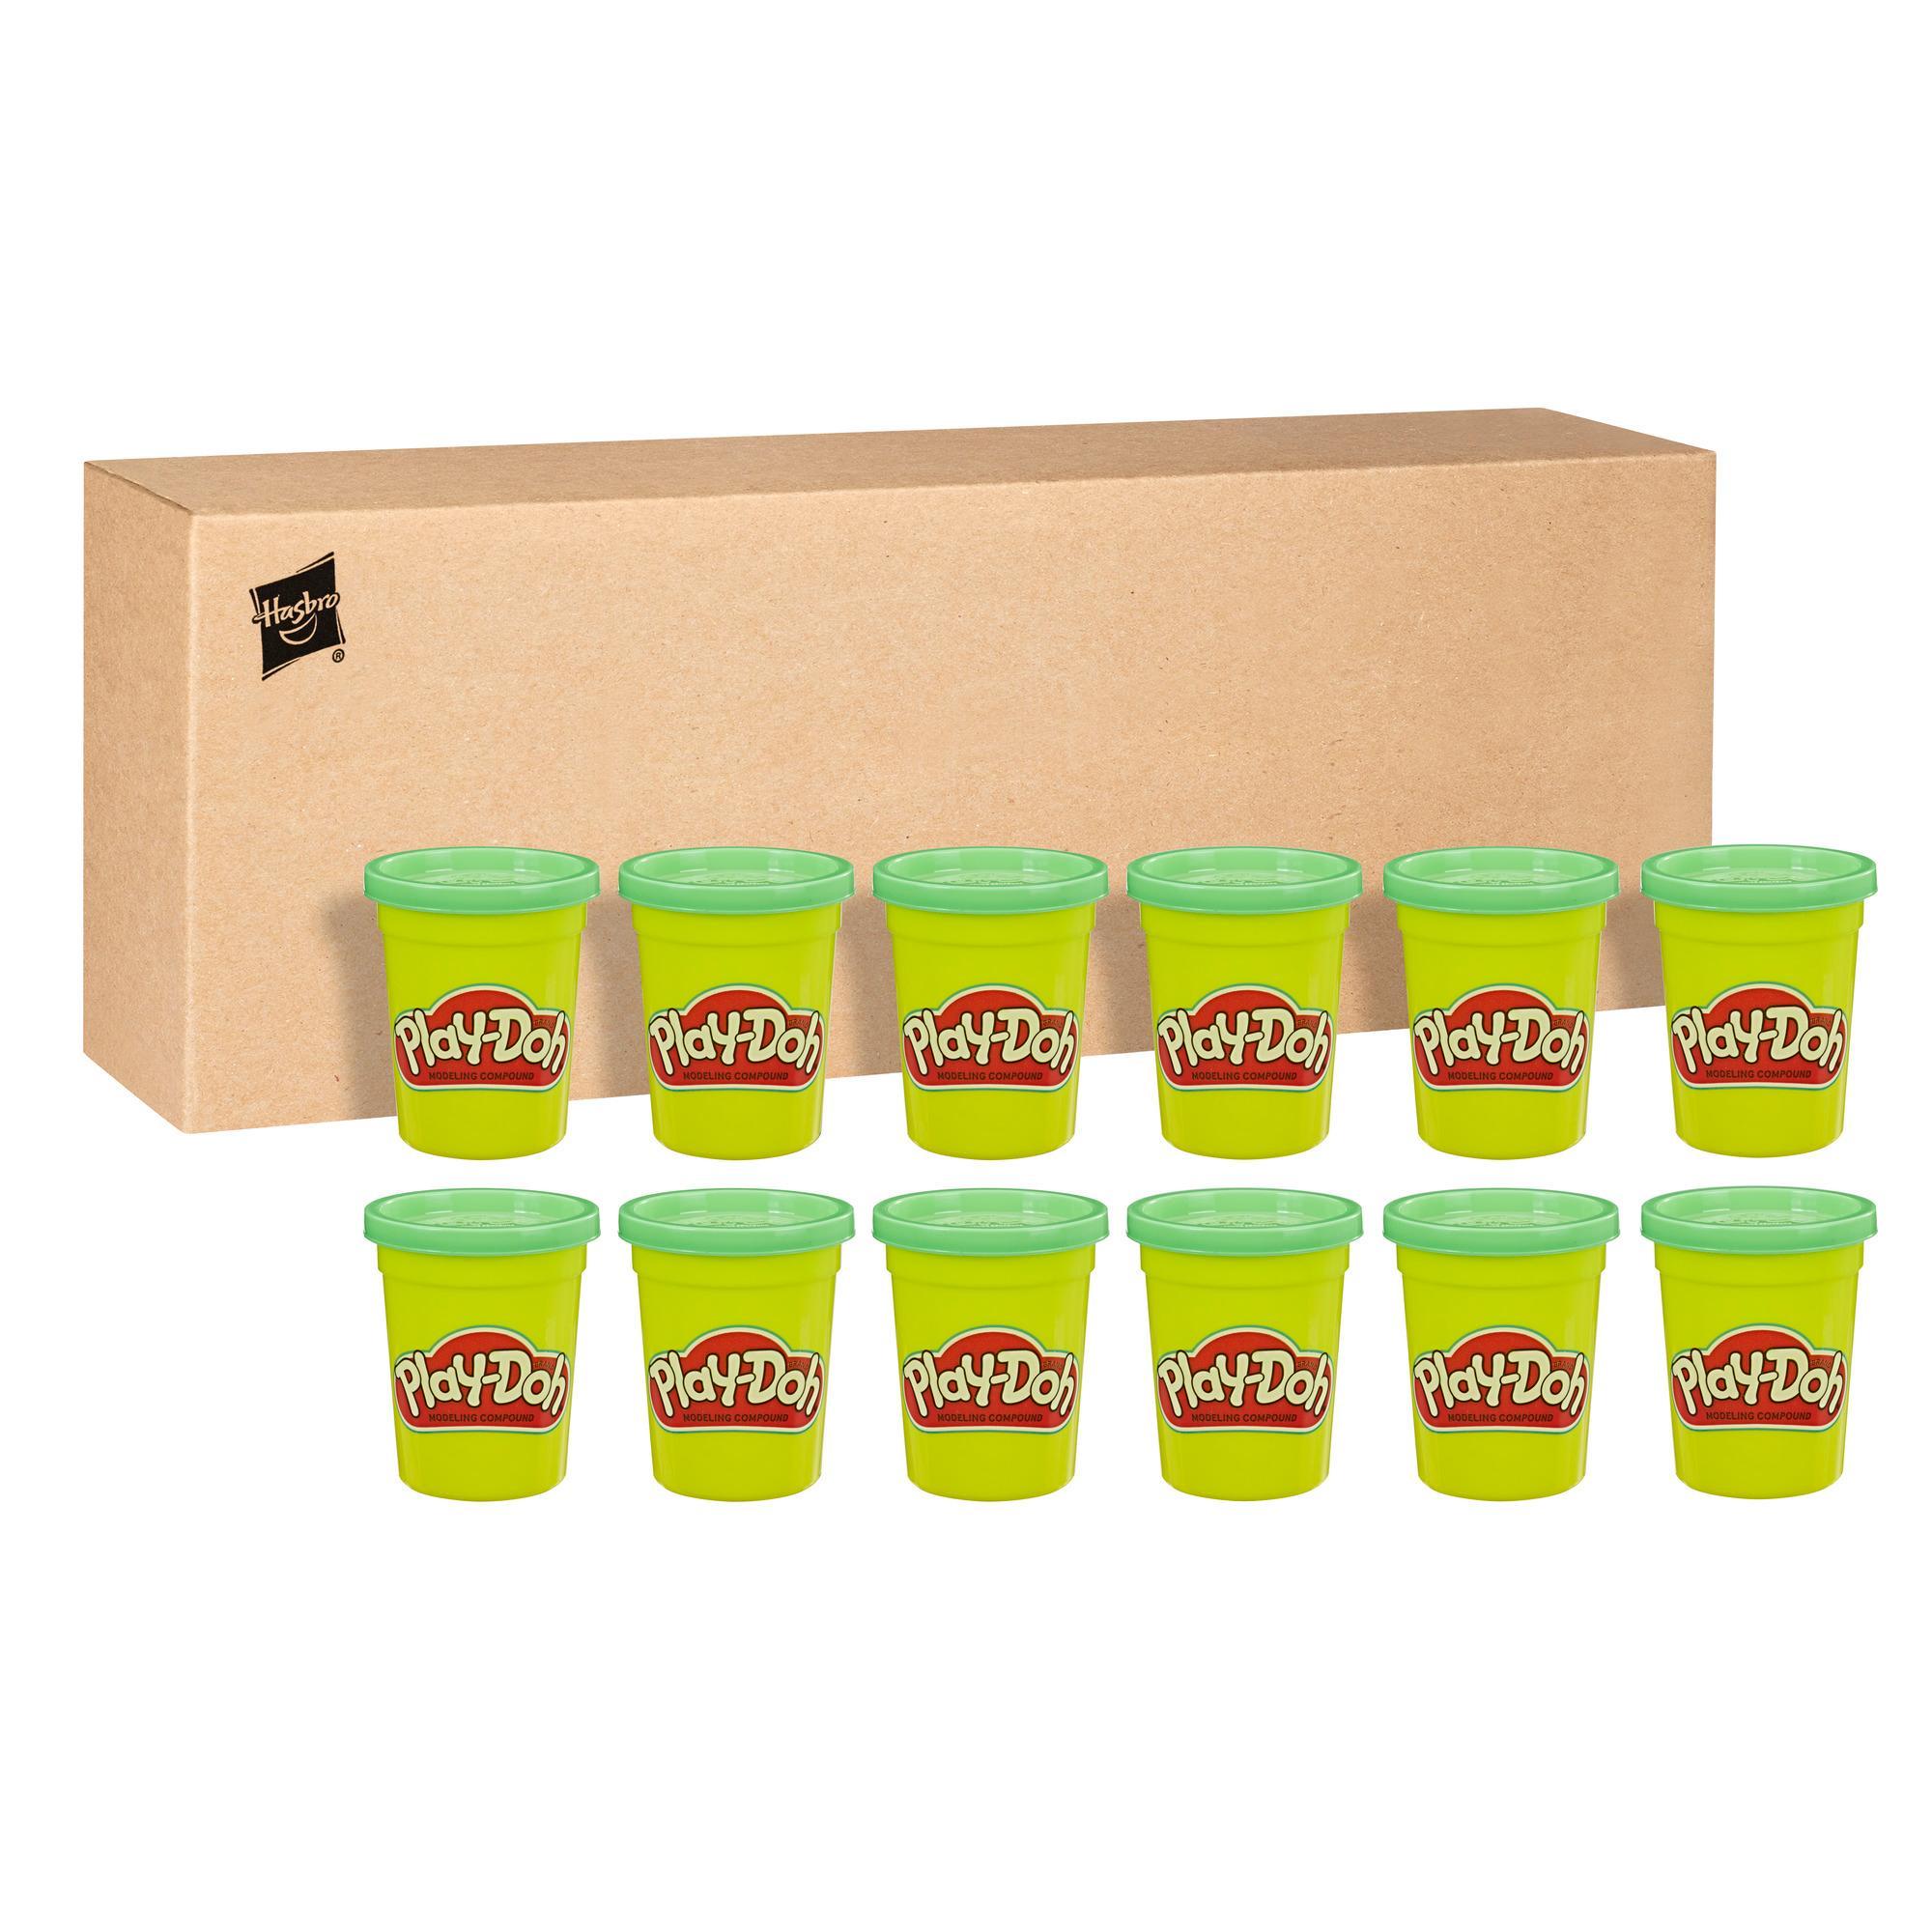 Play-Doh Bulk 12-Pack of Green Non-Toxic Modeling Compound, 4-Ounce Cans product thumbnail 1